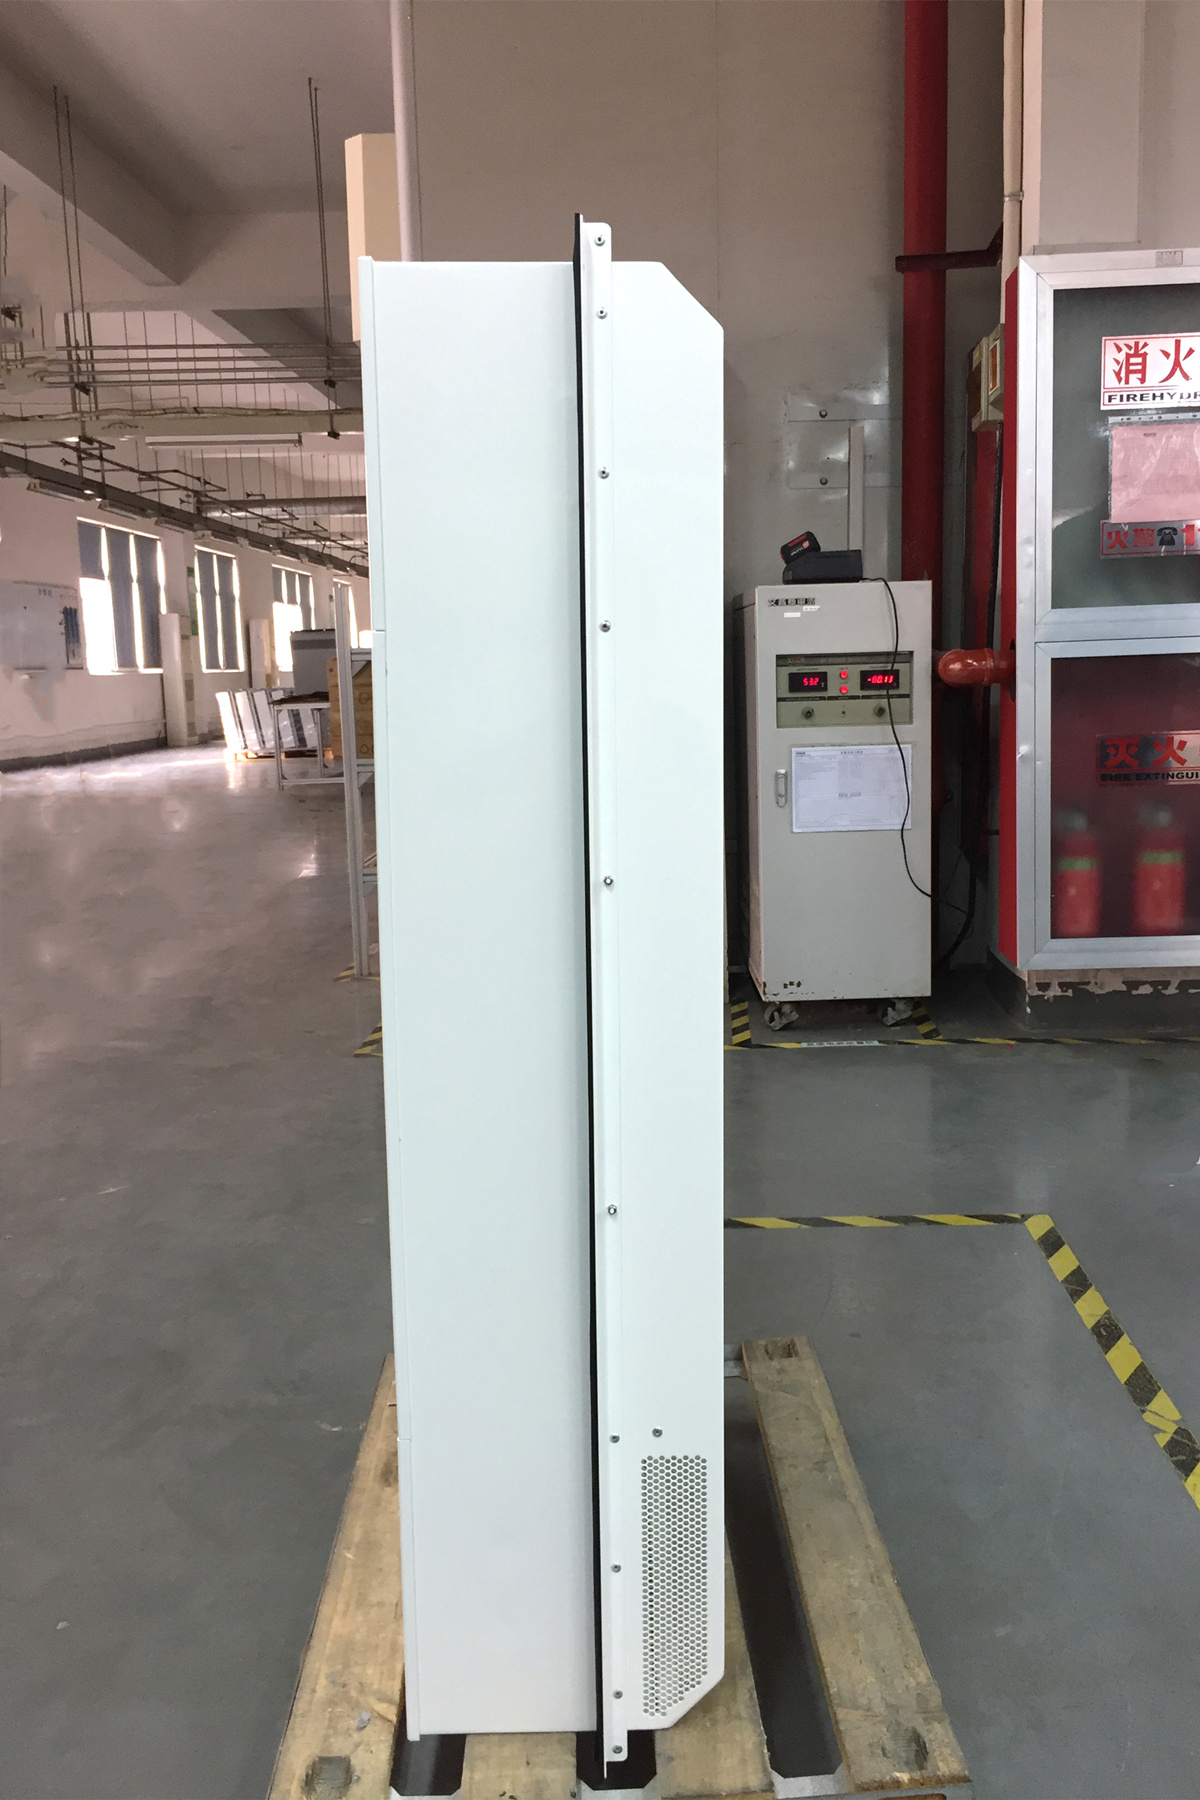 260W/K DC Powered Outdoor Cabinet Heat Exchanger,door Mounted Air Cooling System for Telecom Cabinets